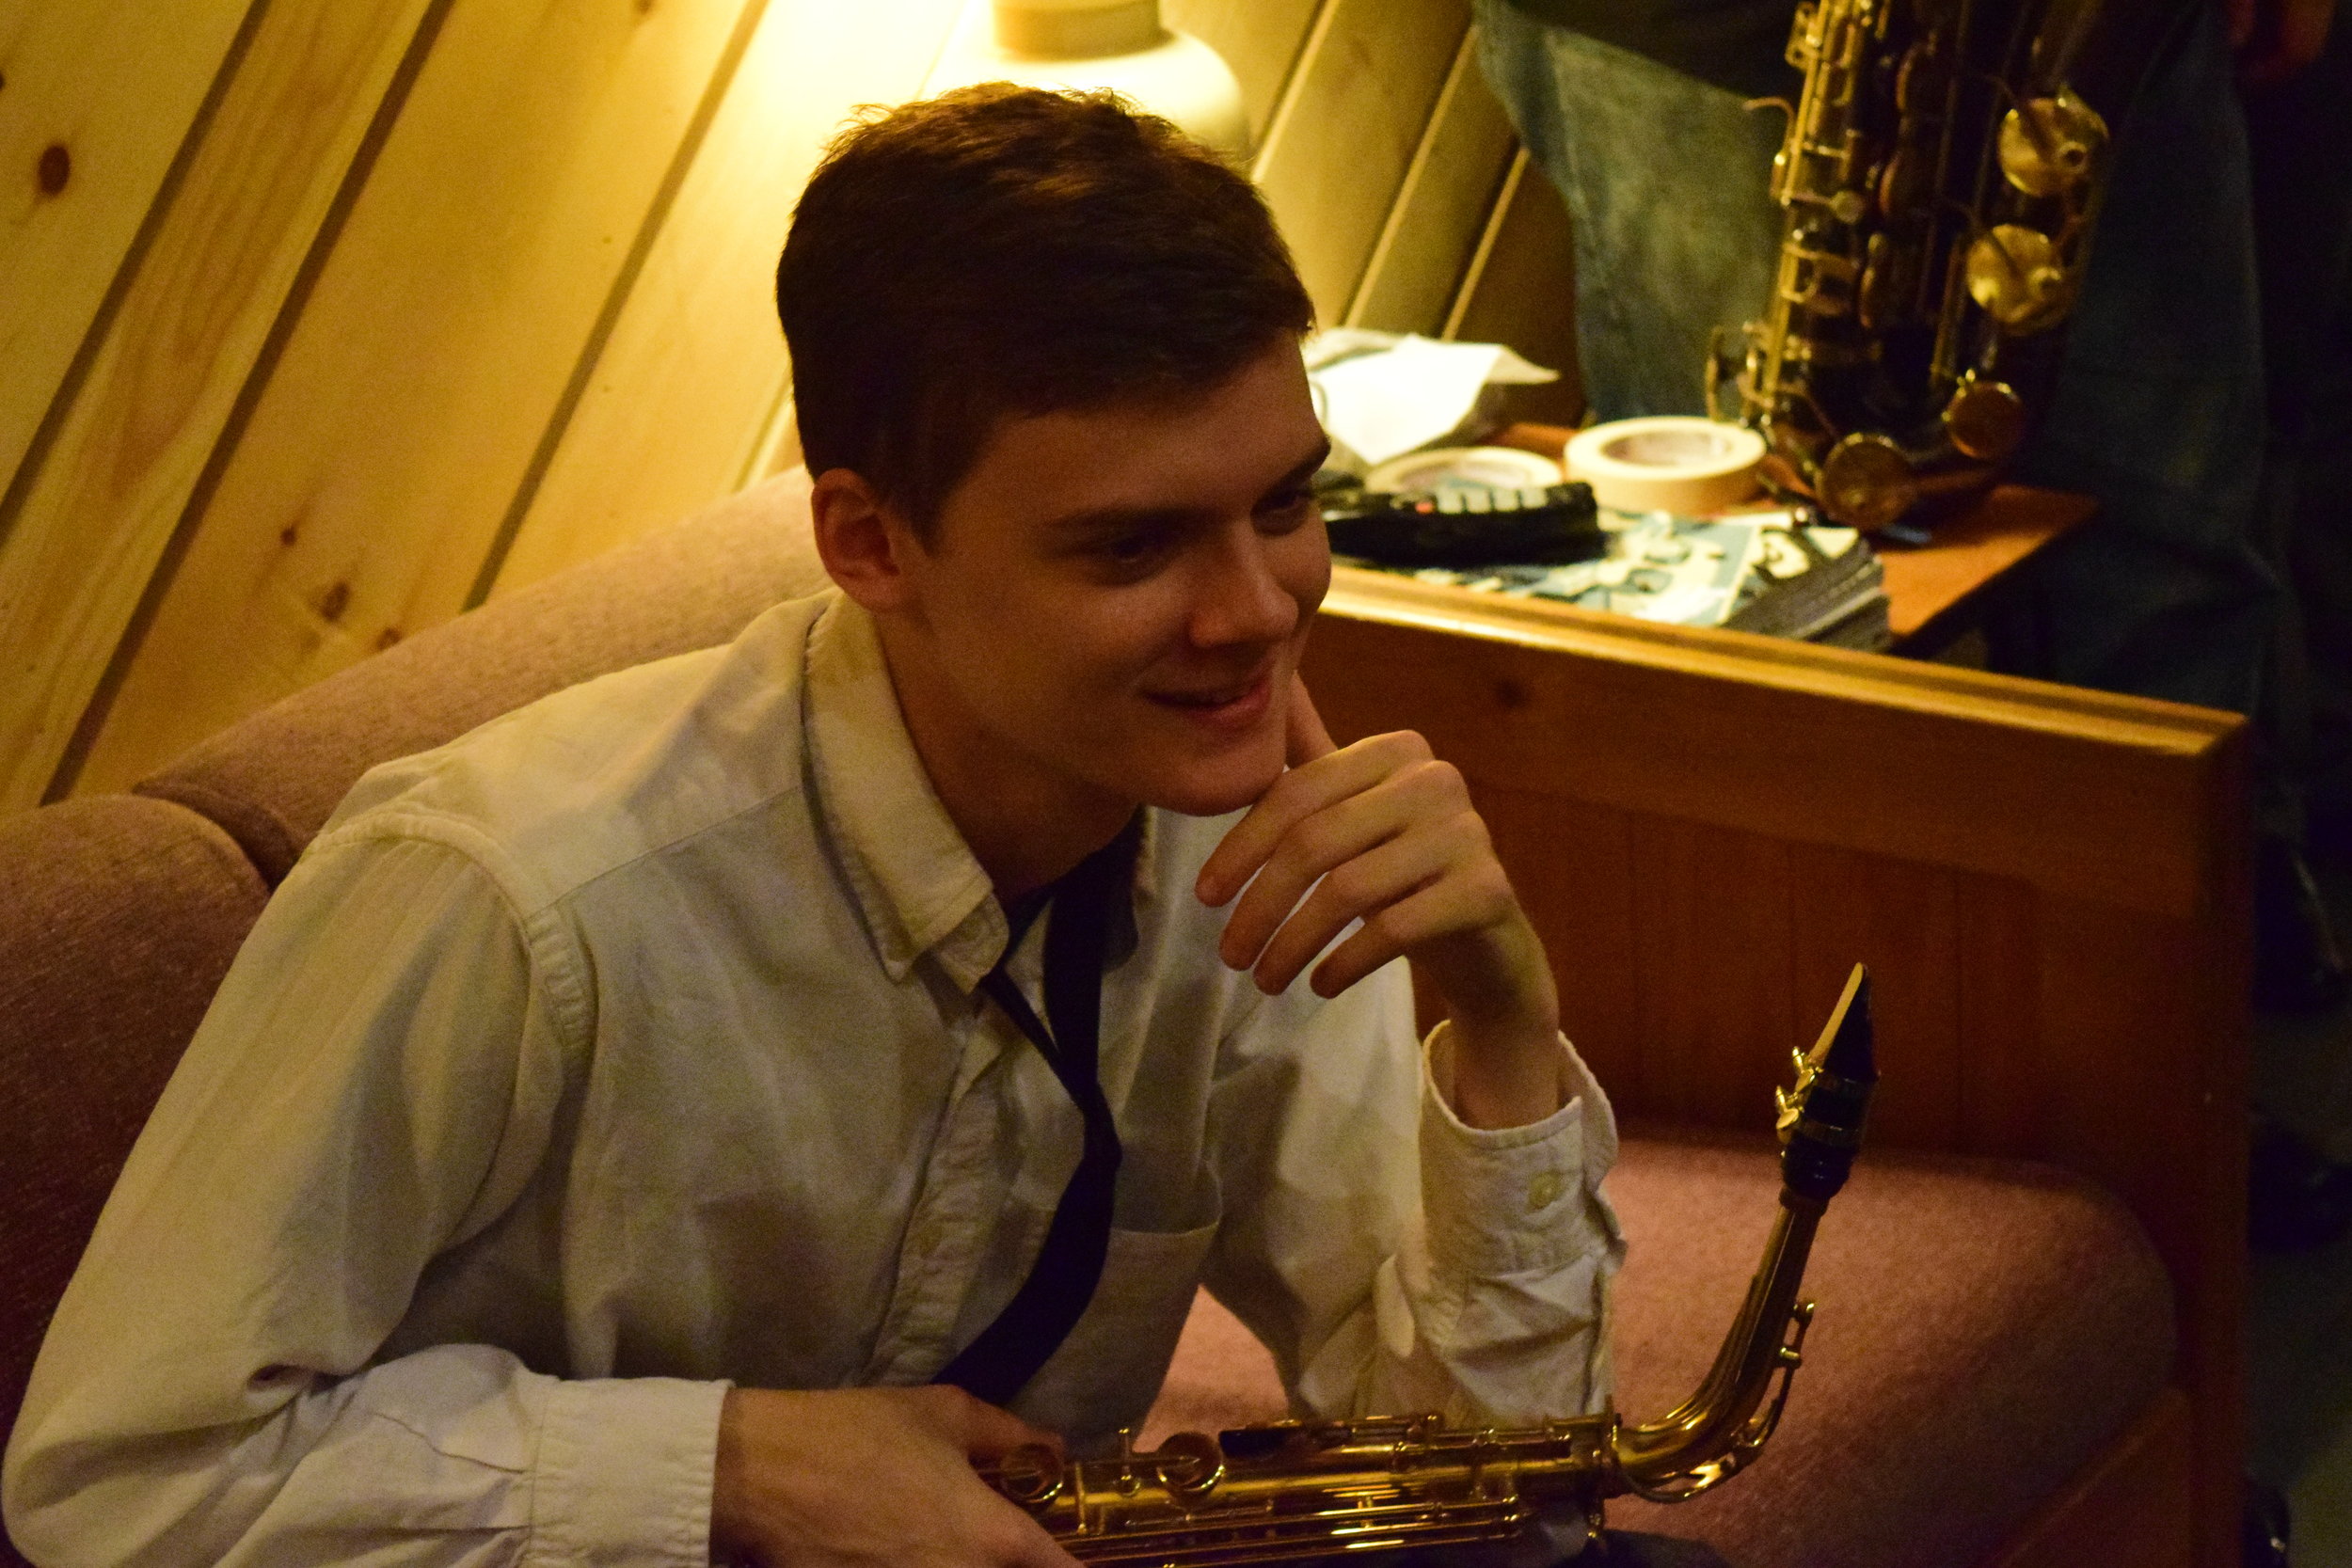 A Daniel Dickinson (not me) on a couch and holding a saxophone. A much more musical person with the same name!